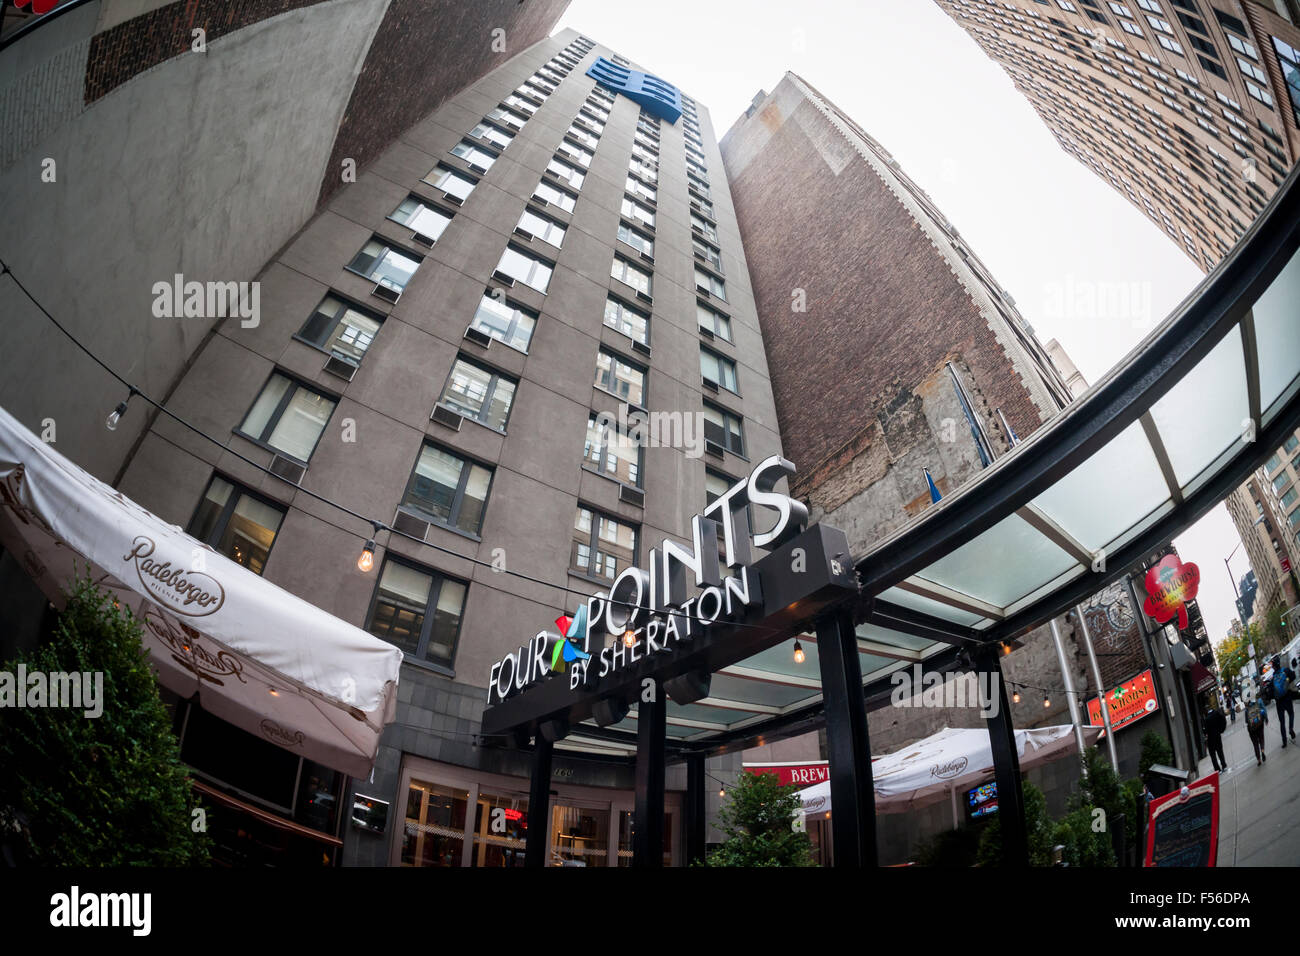 A Four Points by Sheraton Hotel, a brand of Starwood Hotels, in the Chelsea neighborhood of New York on Tuesday, October 27, 2015. Three Chinese companies,  Shanghai Jin Jiang International Hotels, HNA Group and the China Investment Corp. are seeking approval from Beijing to acquire Starwood Hotels.  (© Richard B. Levine) Stock Photo